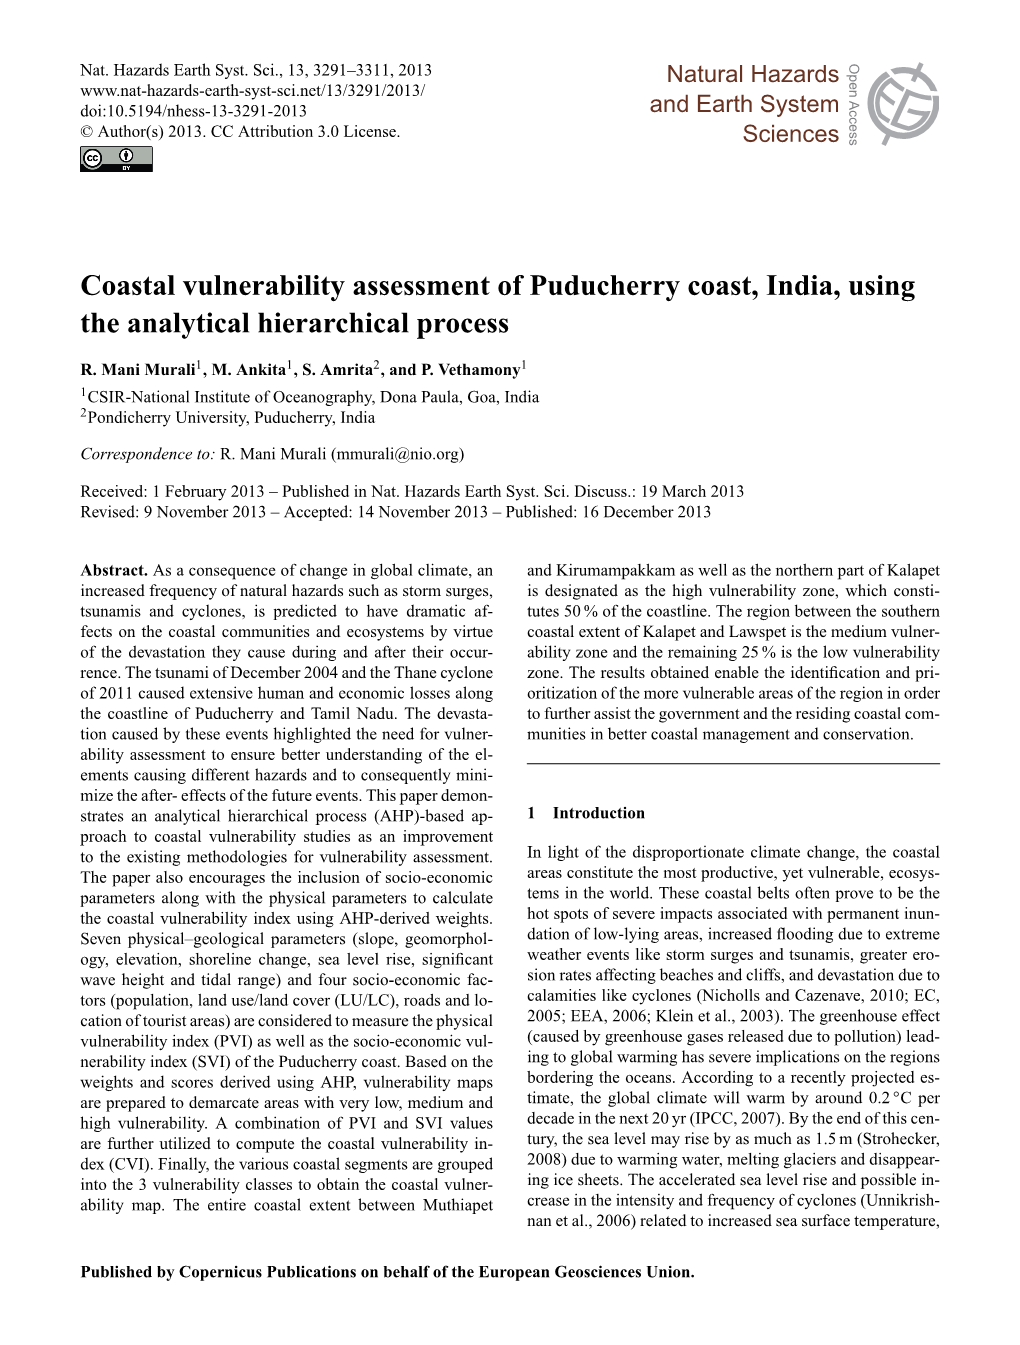 Coastal Vulnerability Assessment of Puducherry Coast, India, Using the Analytical Hierarchical Process